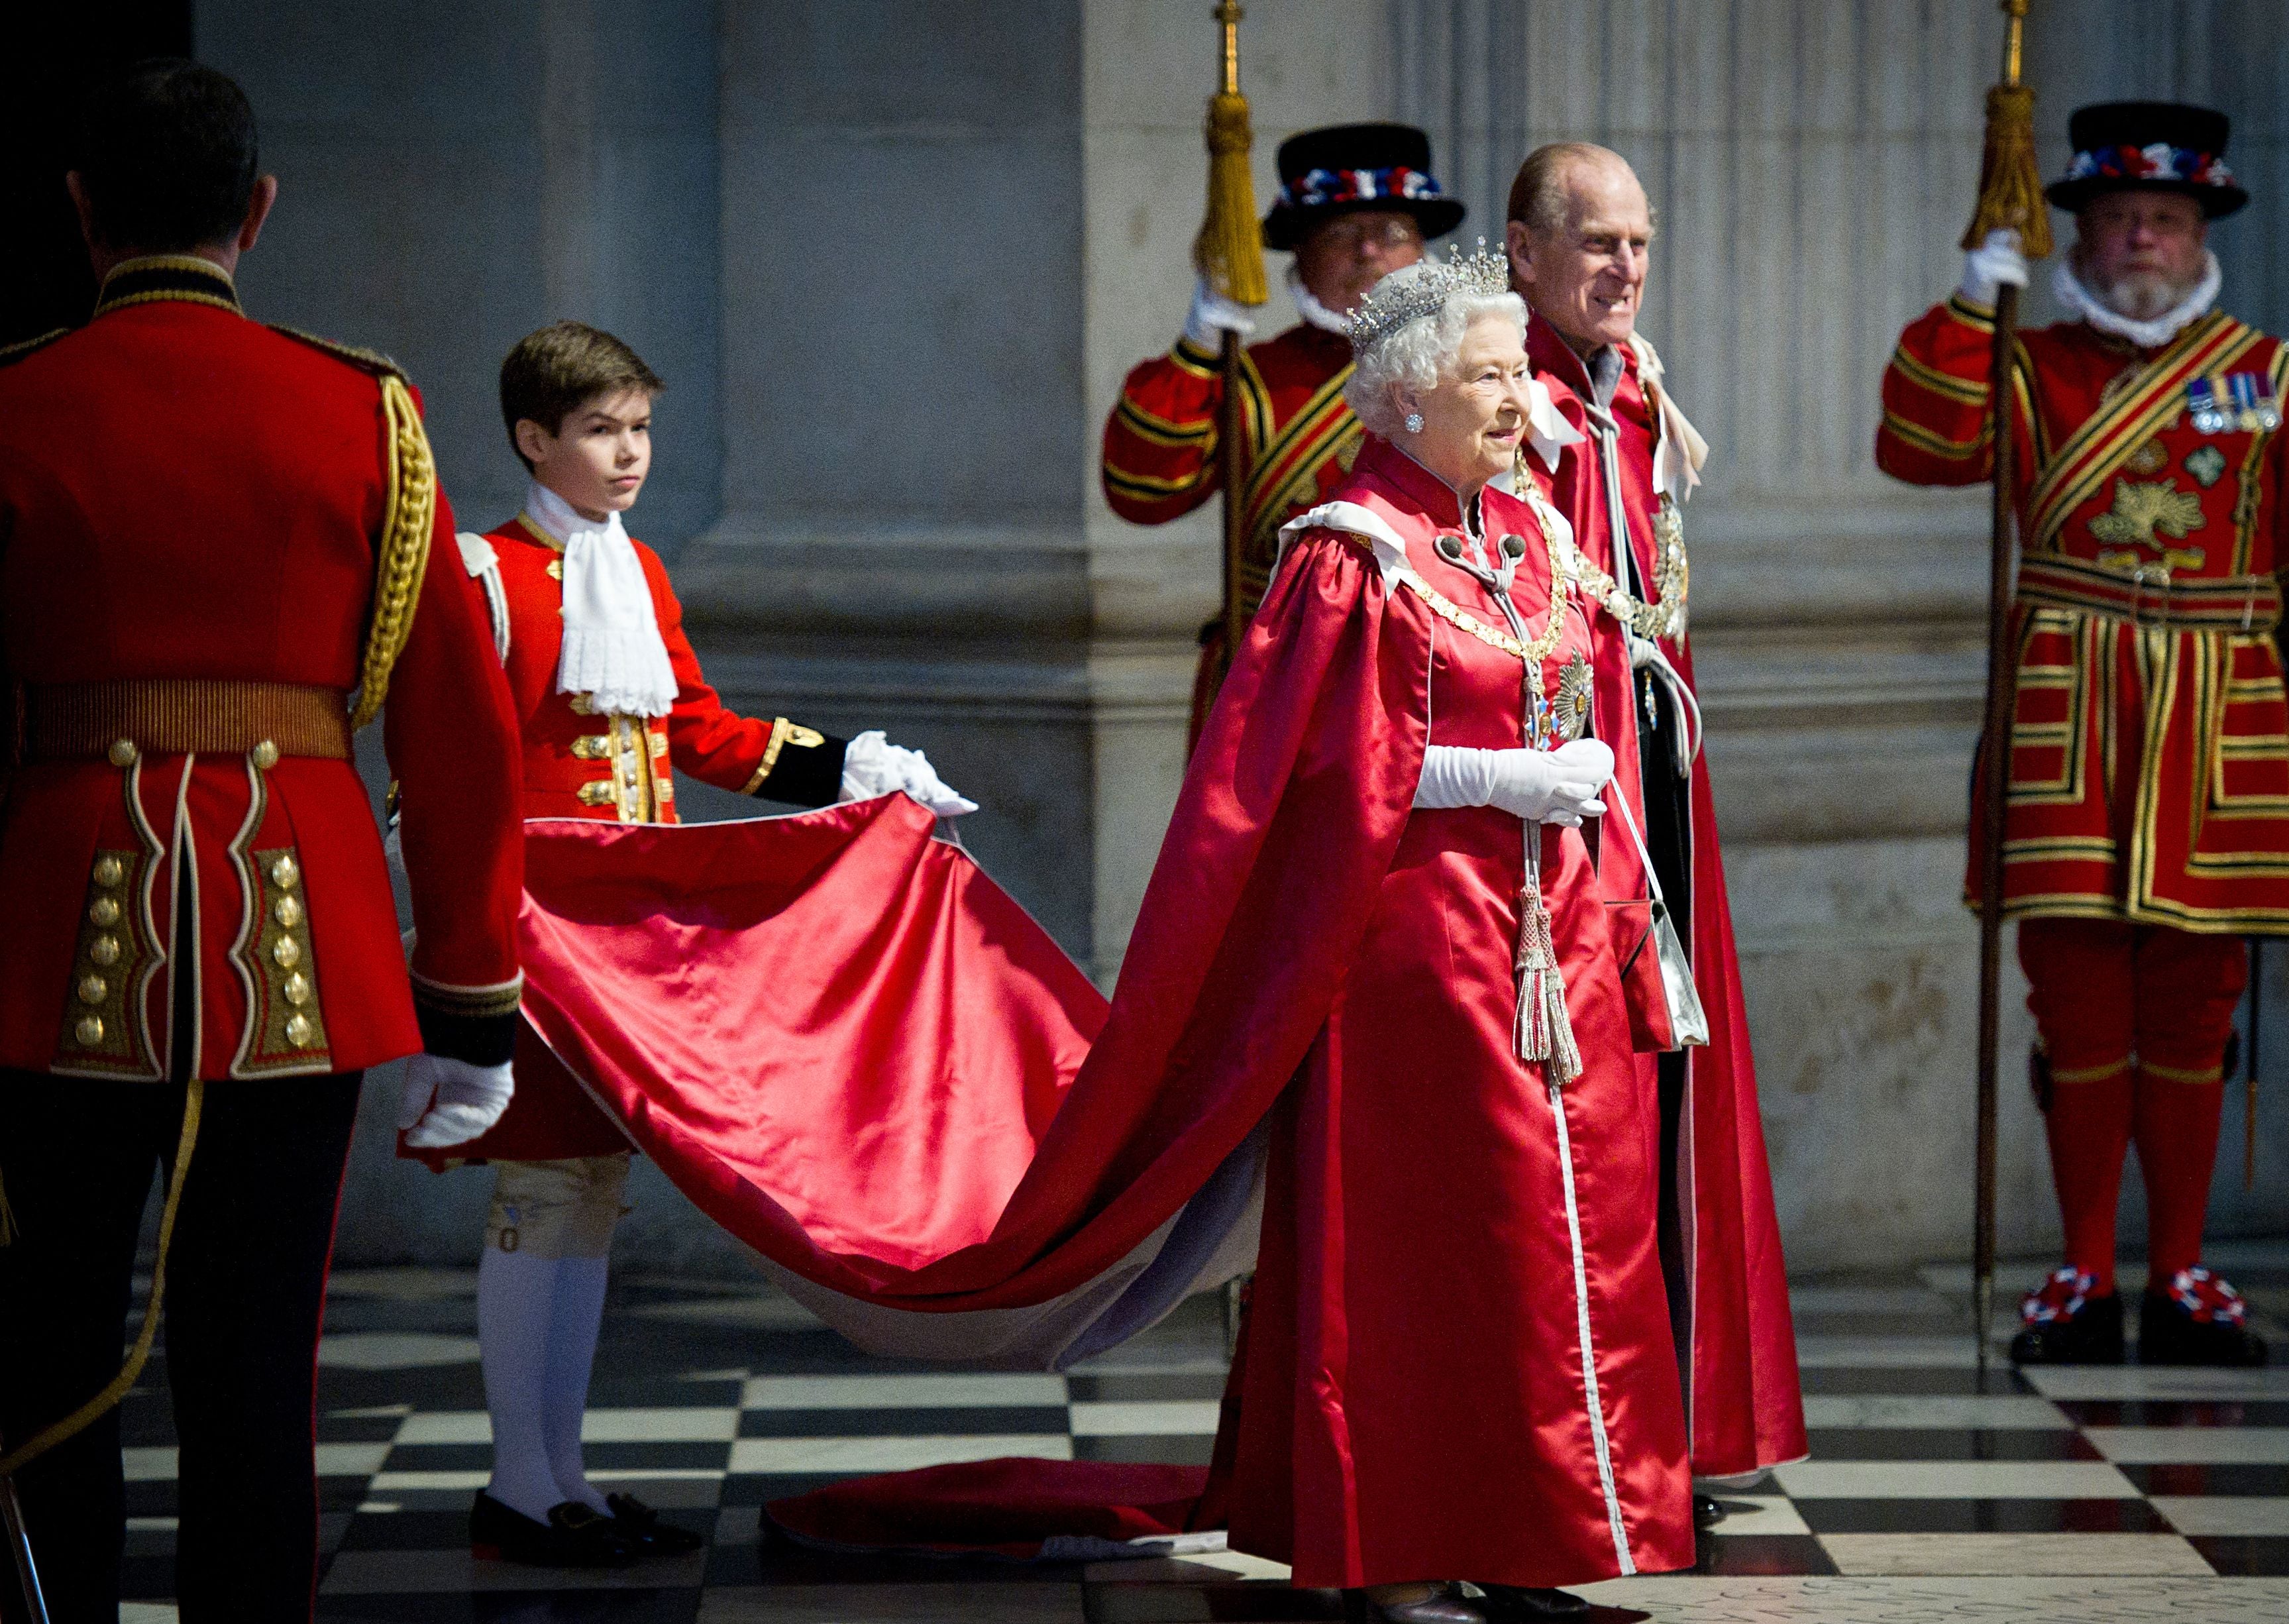 Queen Elizabeth II and Prince Philip attend a service for the Order of the British Empire at St Paul's Cathedral in London, 2012